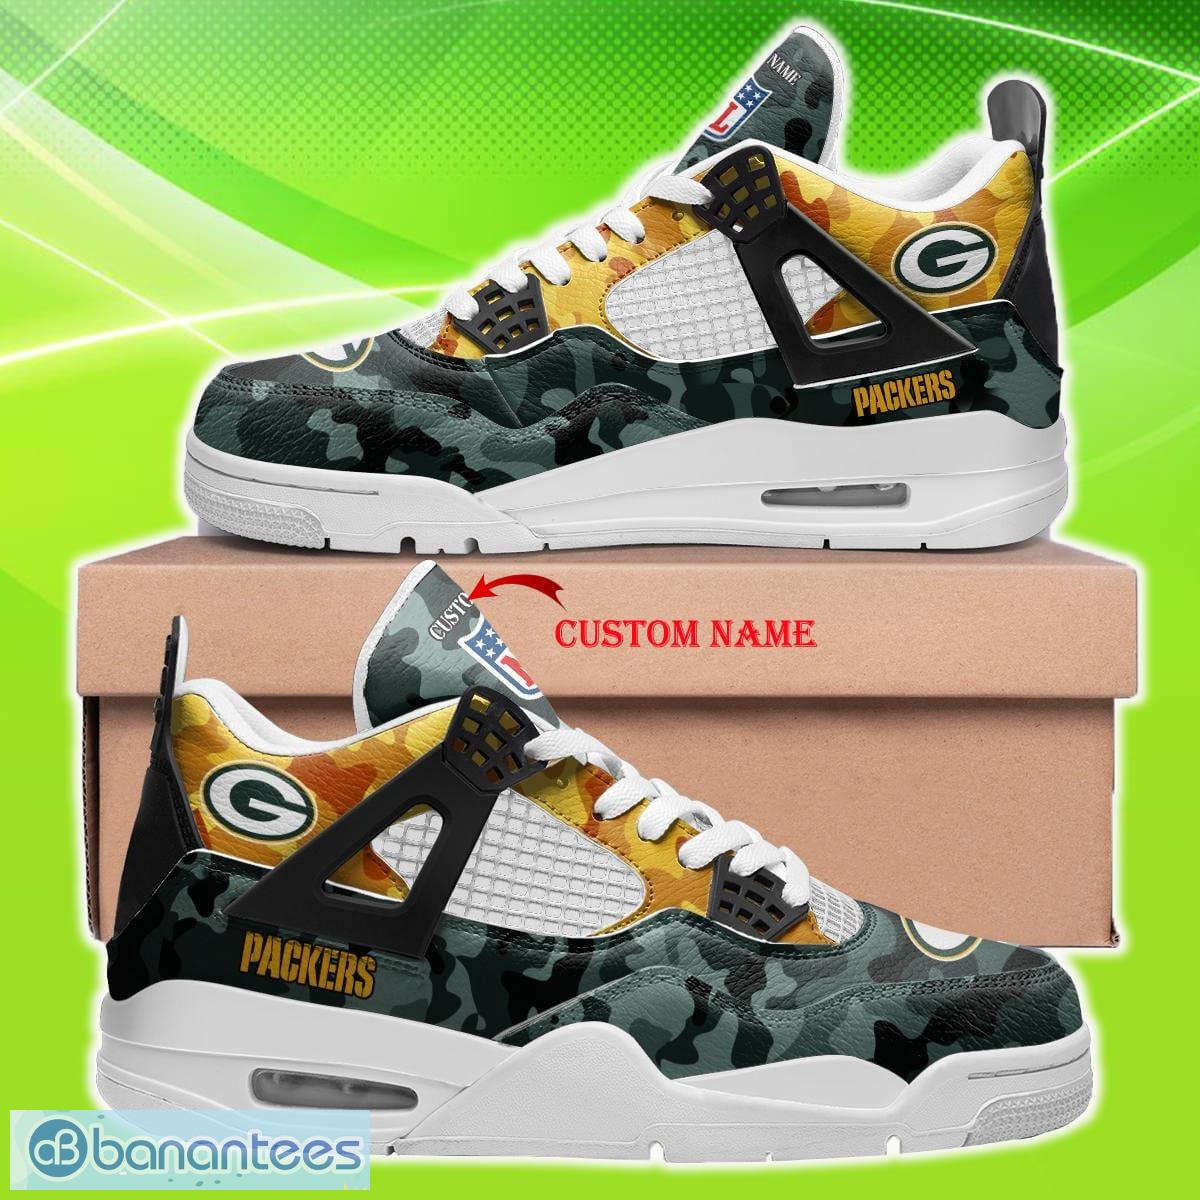 Green Bay Packers Custom Name Air Jordan 4 Sports Shoes Camo New For Men And Women Gift Fans - Green Bay Packers Personalized Jordan 4 Fabric Sneaker - Custom Name Sneaker For Men & Women - NFL Lovers, Birthday's Gift, Gift For NFL Fan_1